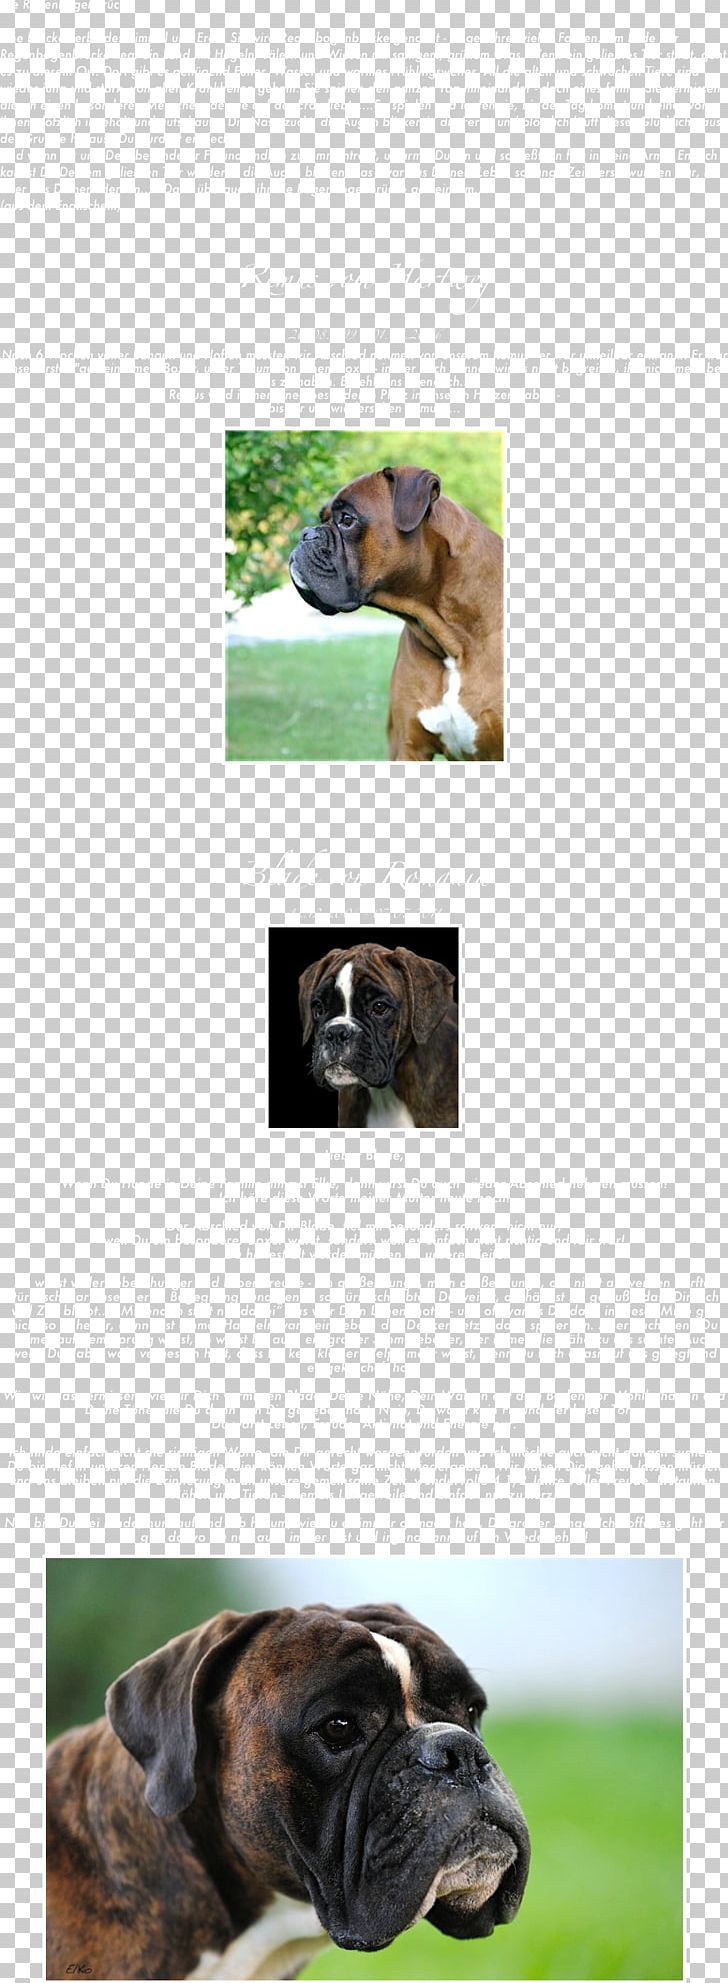 Dog Breed Boxer Leash Obedience Training Snout PNG, Clipart, Boxer, Breed, Dog, Dog Breed, Dog Like Mammal Free PNG Download